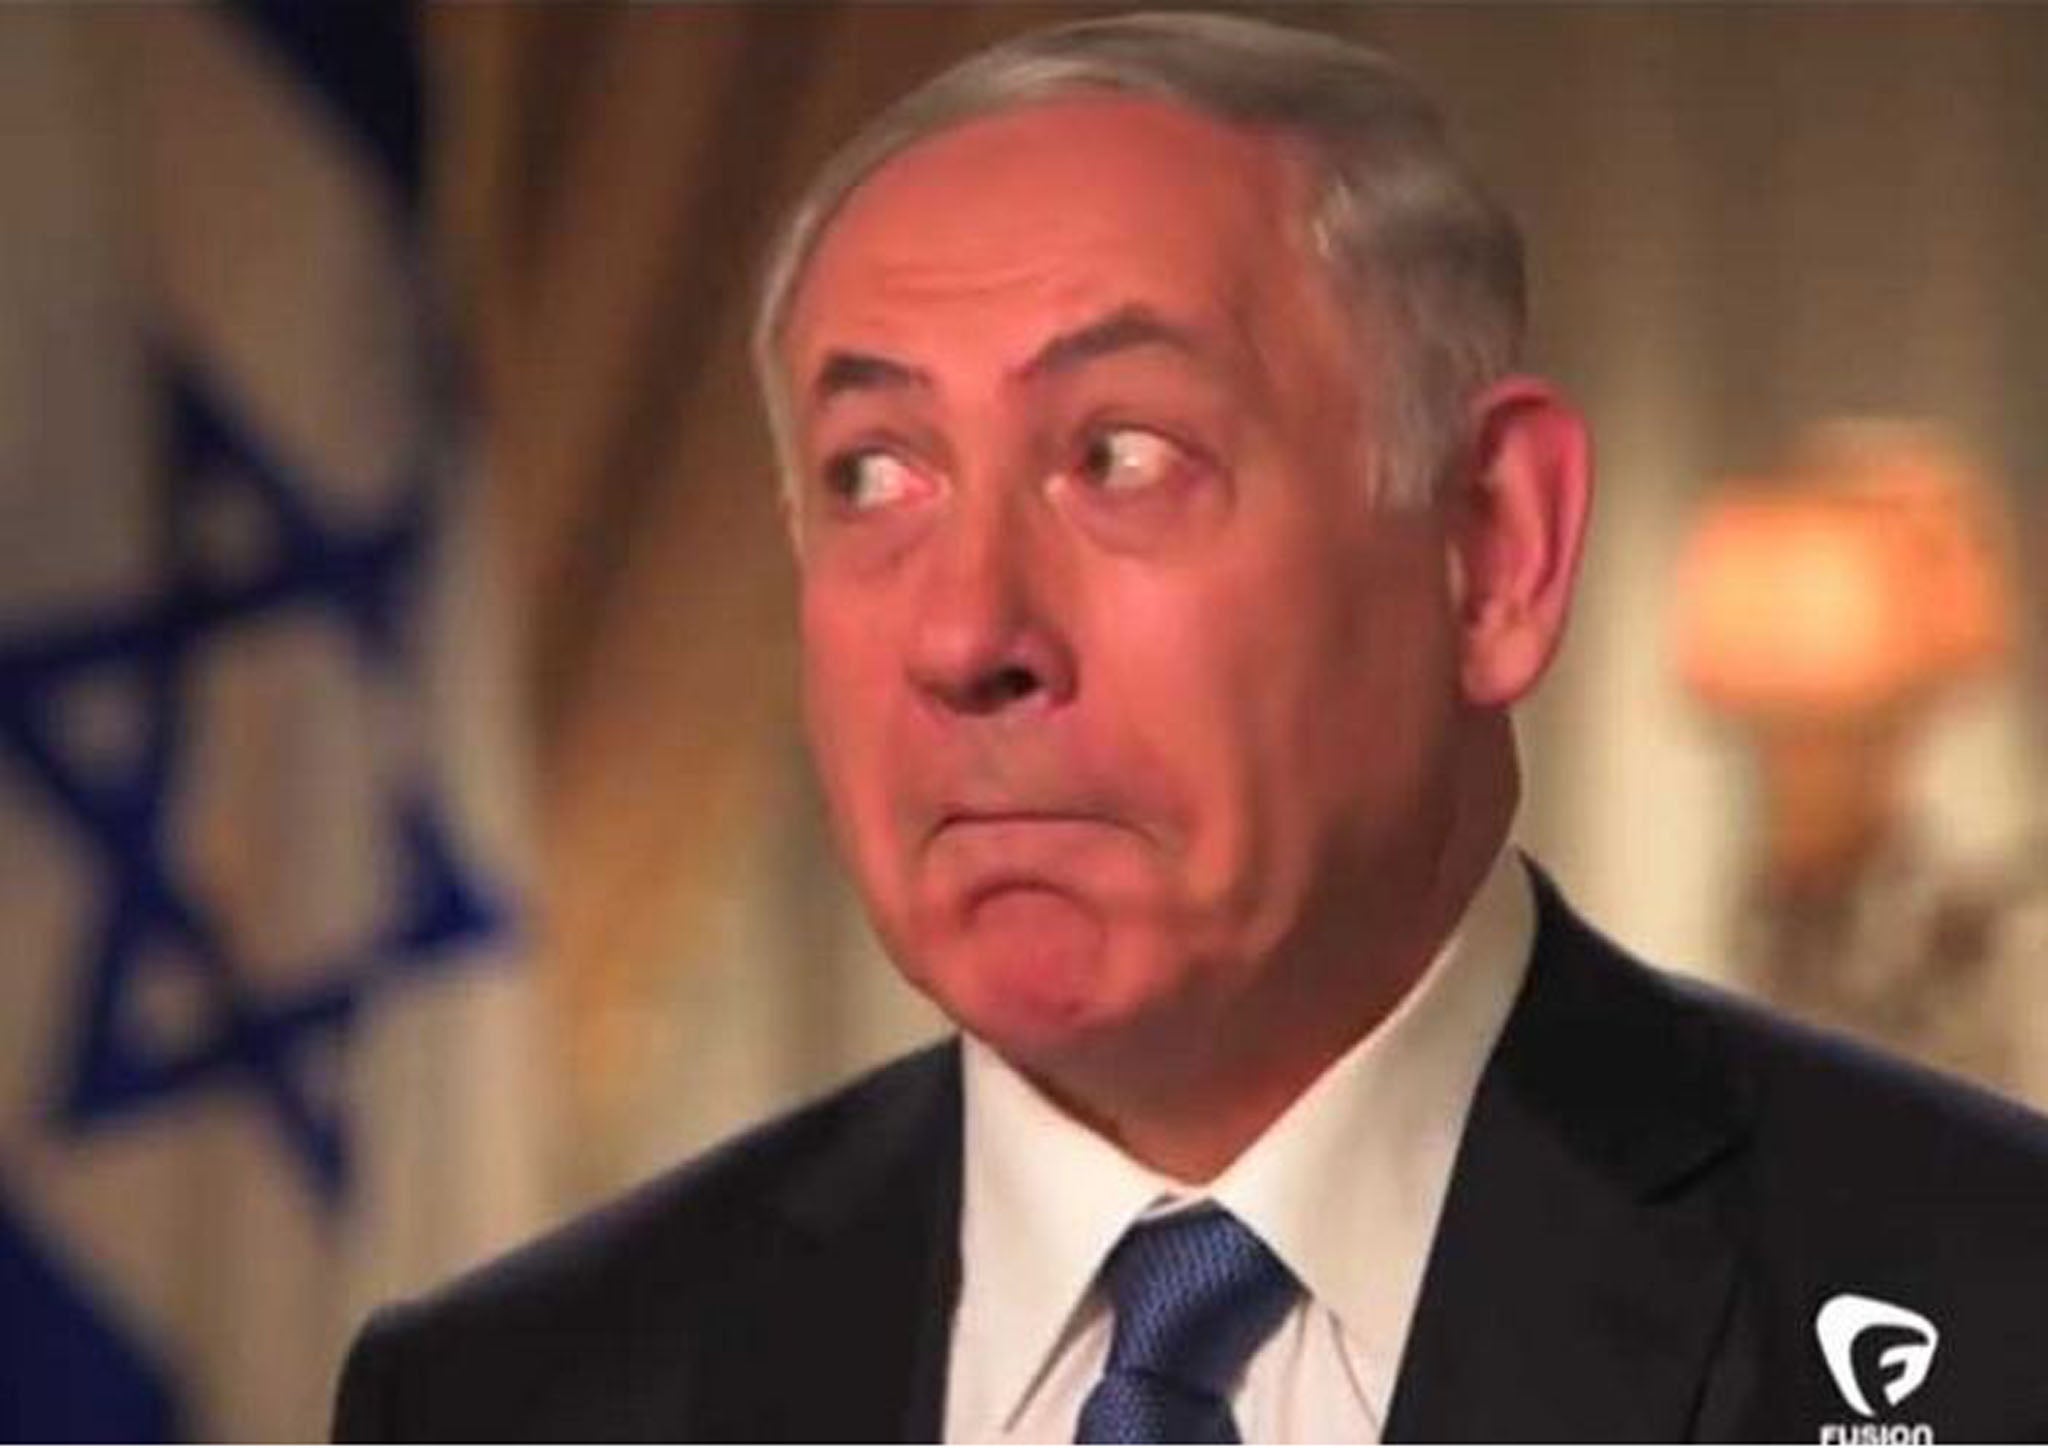 Benjamin Netanyahu reacts to being compared to Beyonce by J Street protesters